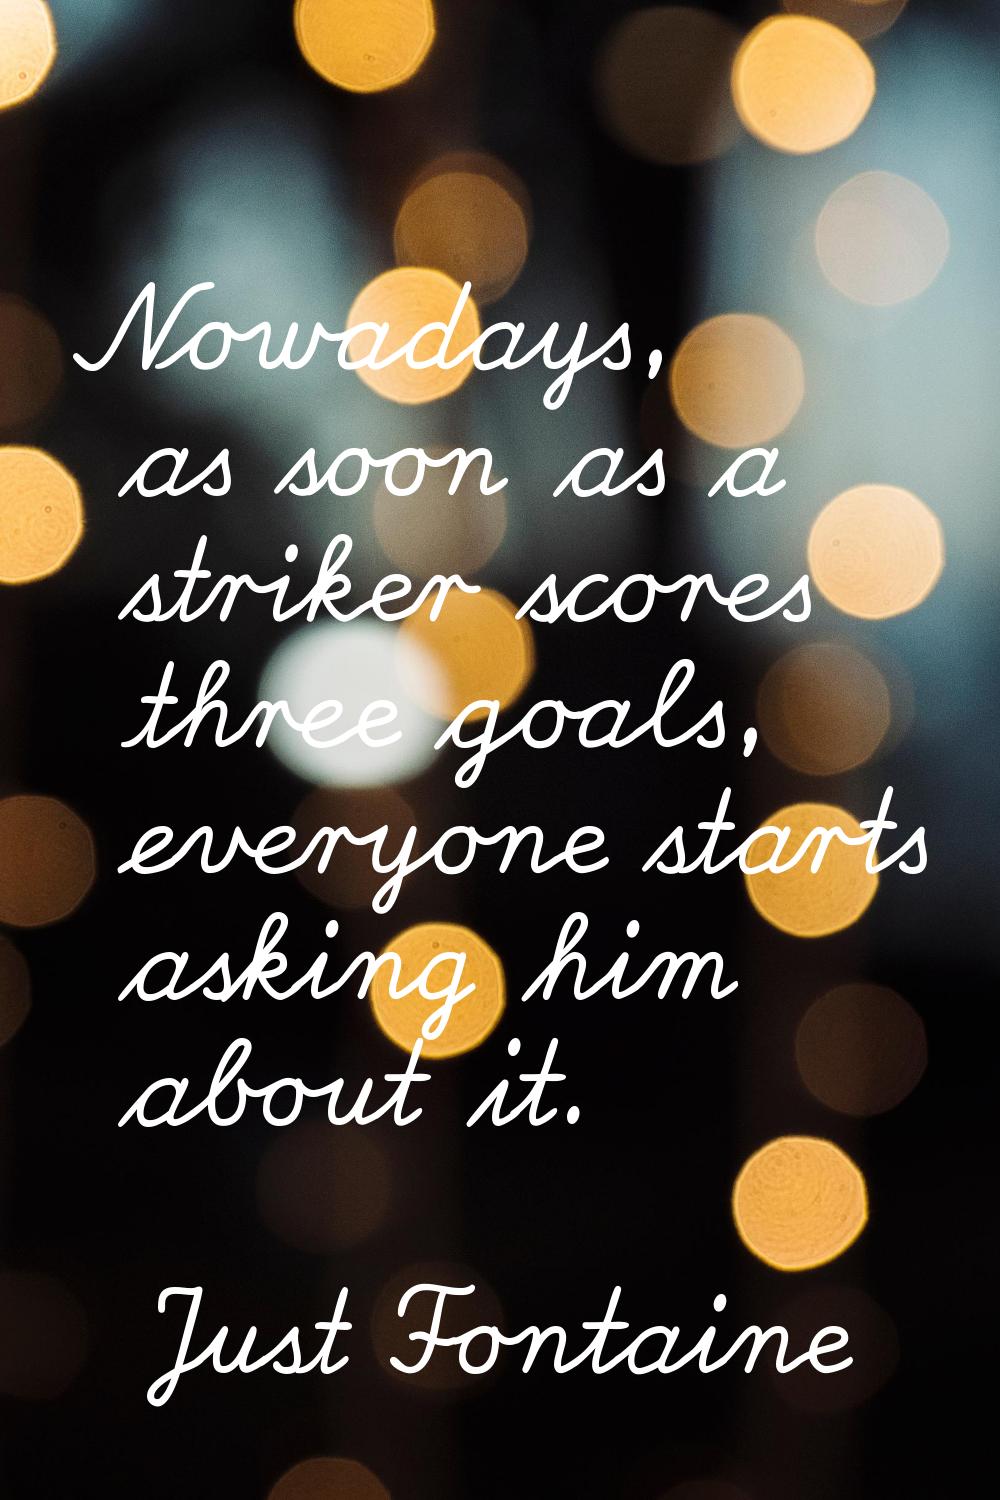 Nowadays, as soon as a striker scores three goals, everyone starts asking him about it.